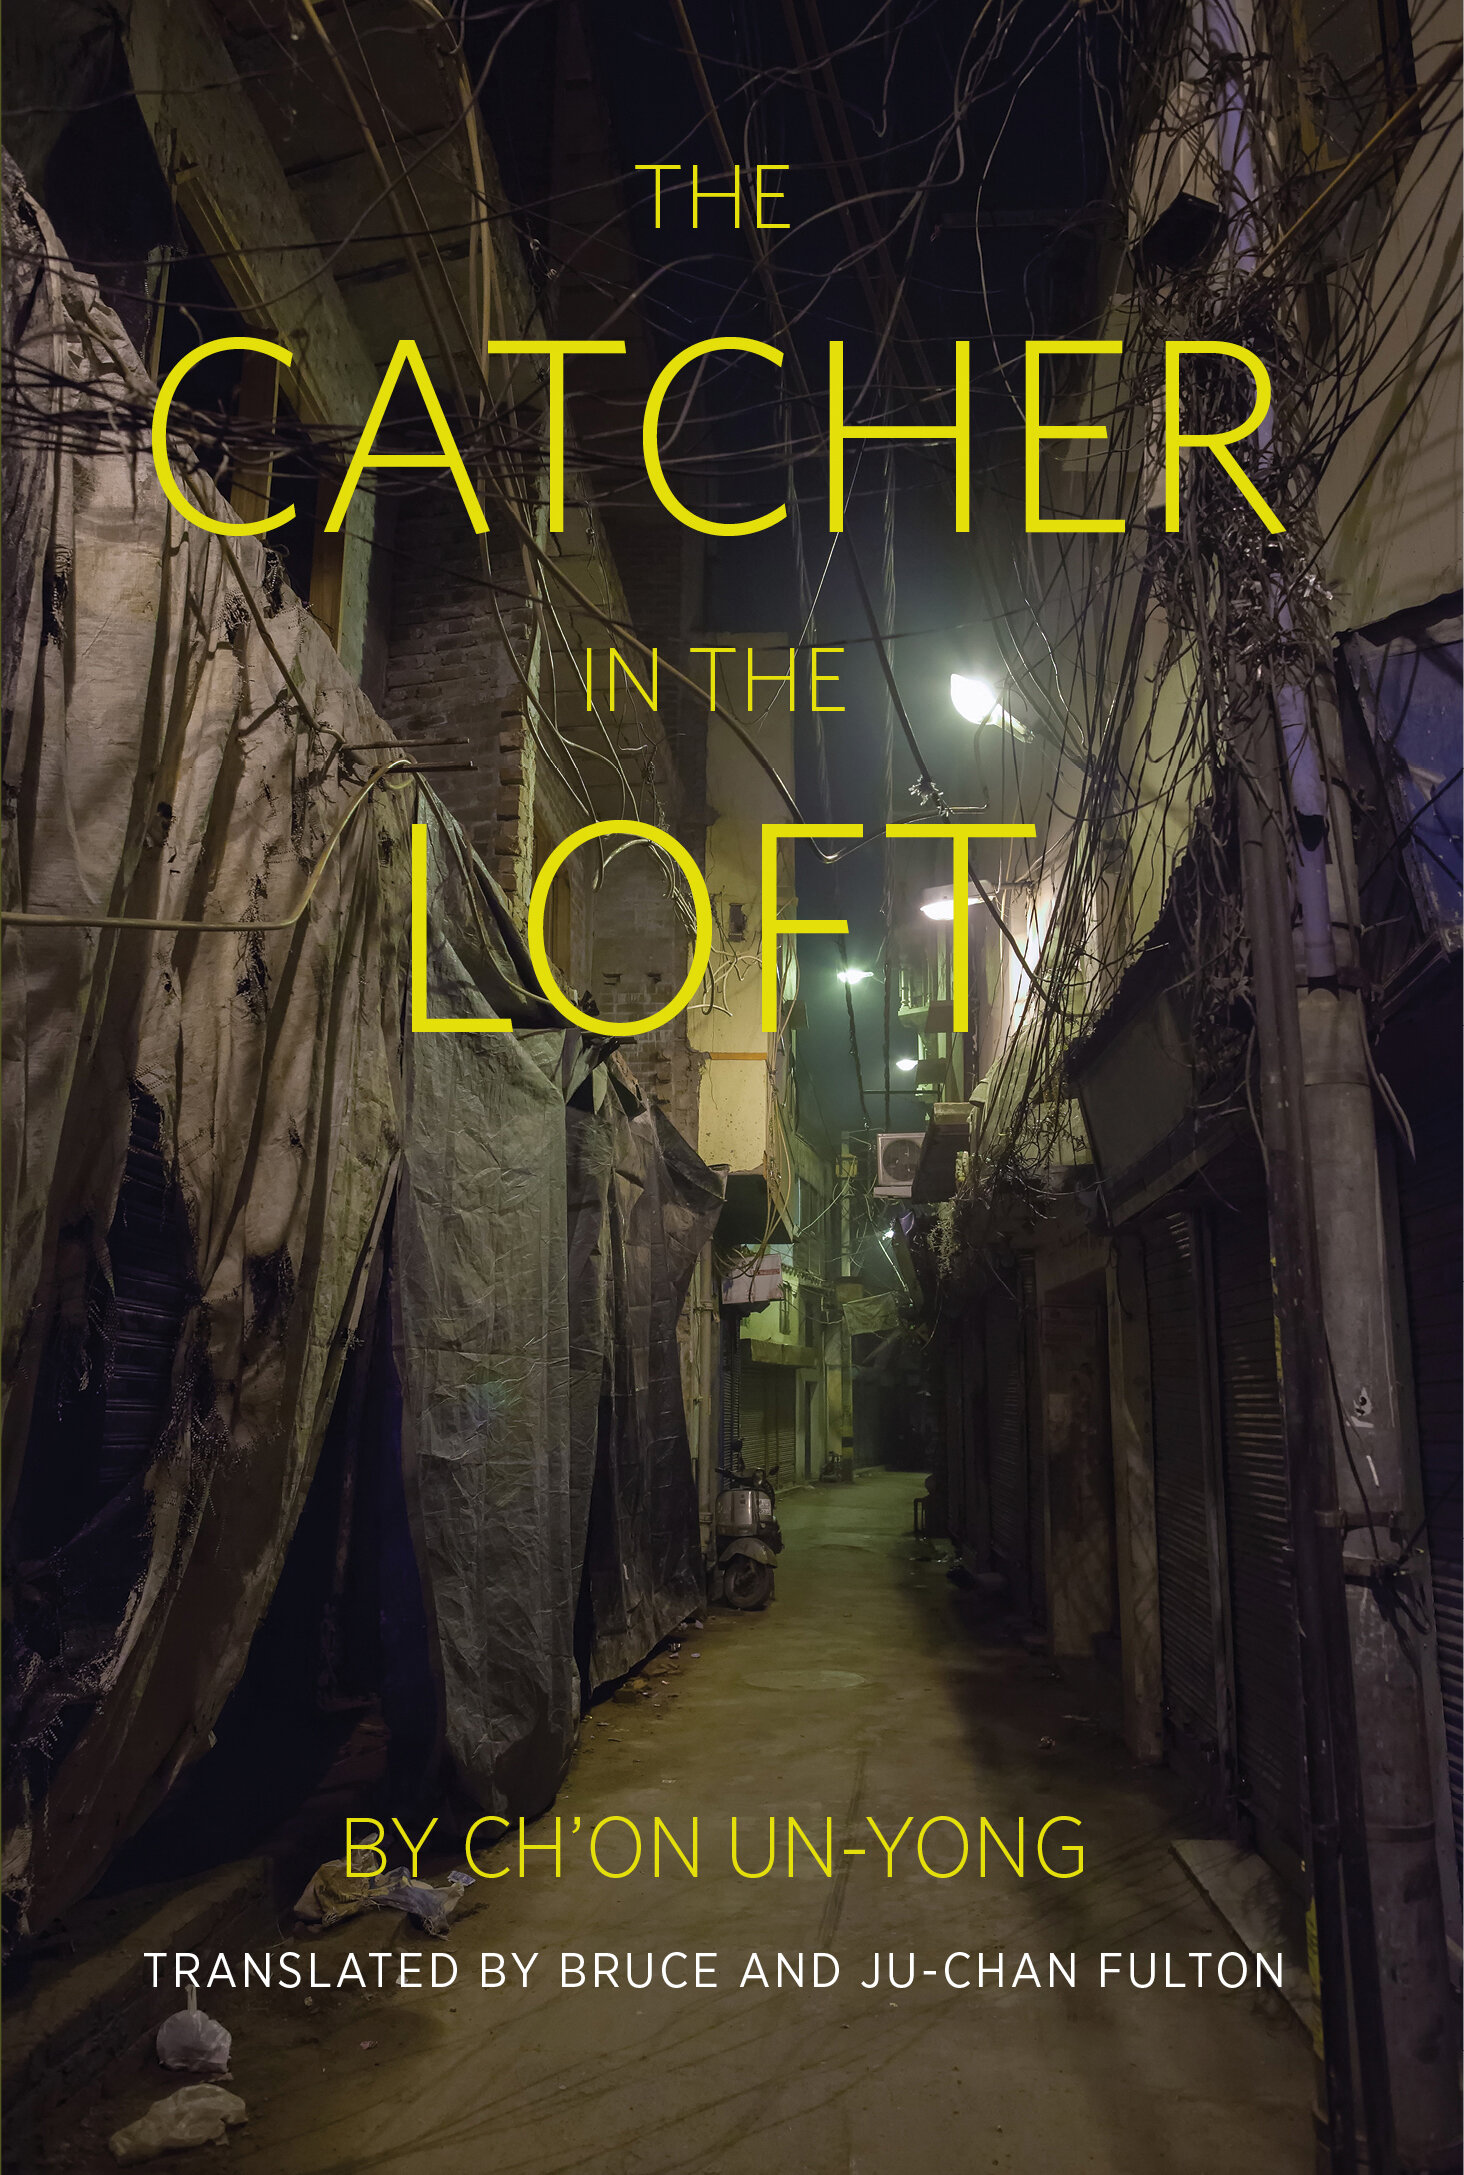 Catcher_COVER_FRONT.jpg